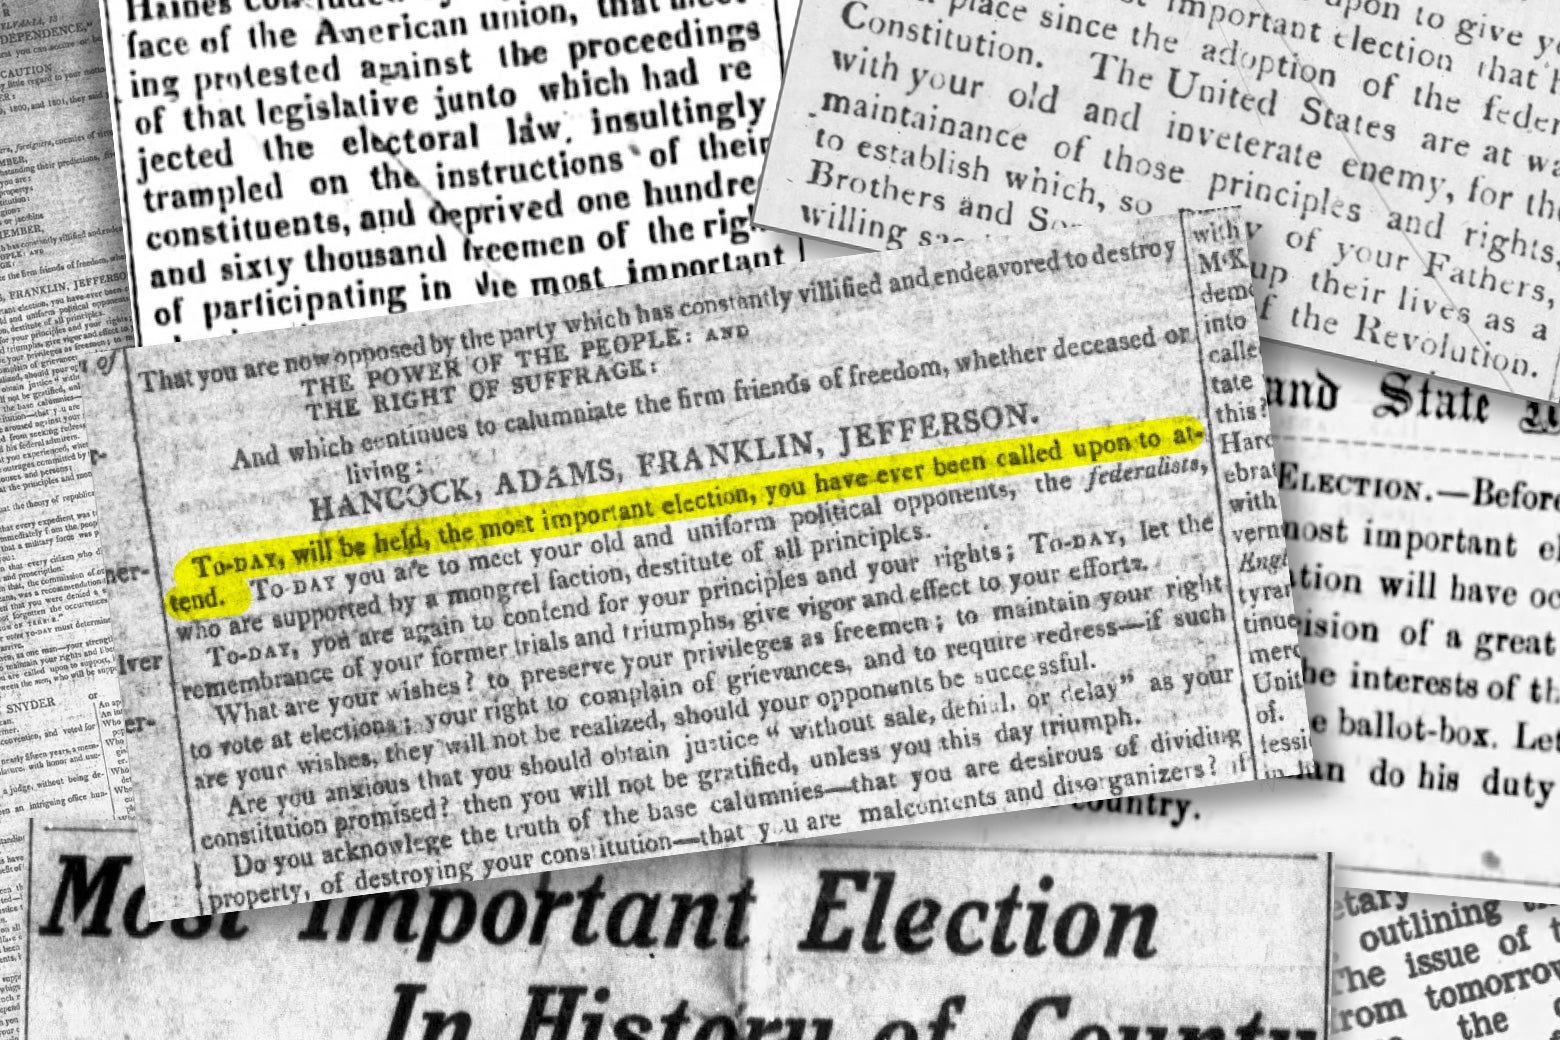 Clips from newspapers declaring several elections "the most important of our lifetime."